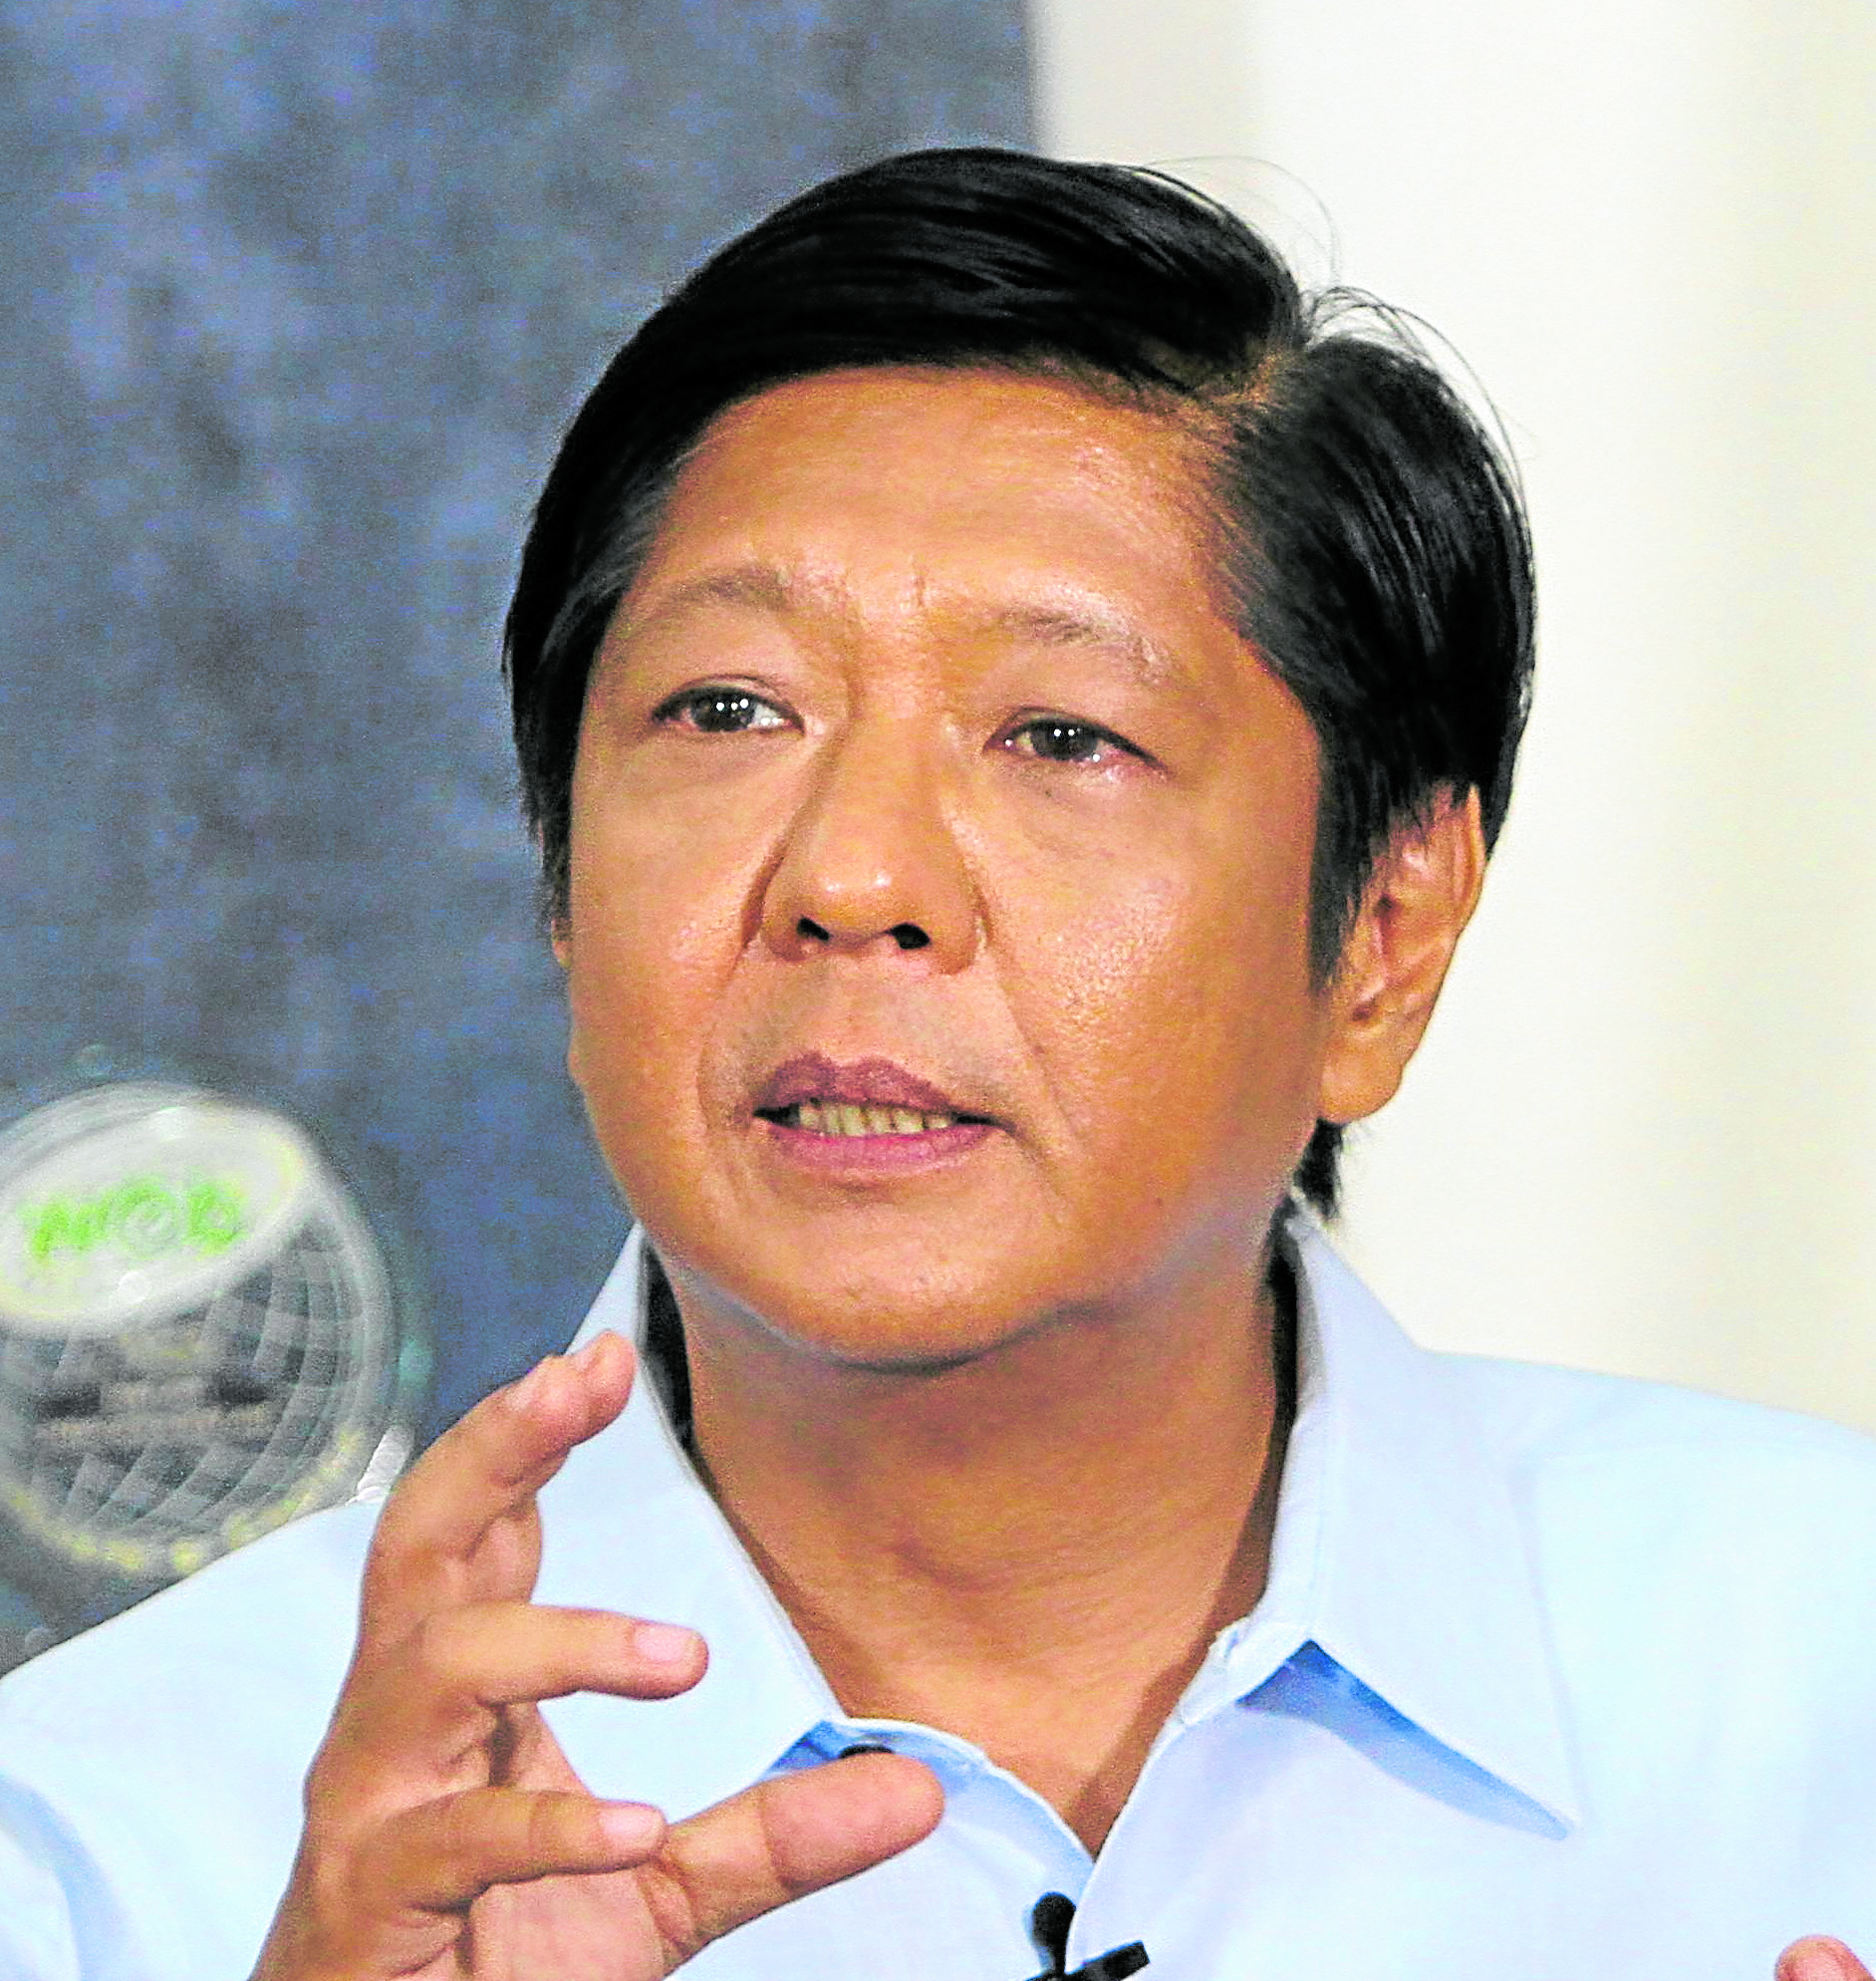 This is a new era': Bongbong Marcos will be a 'unifying' president, says  sister Imee | Inquirer News